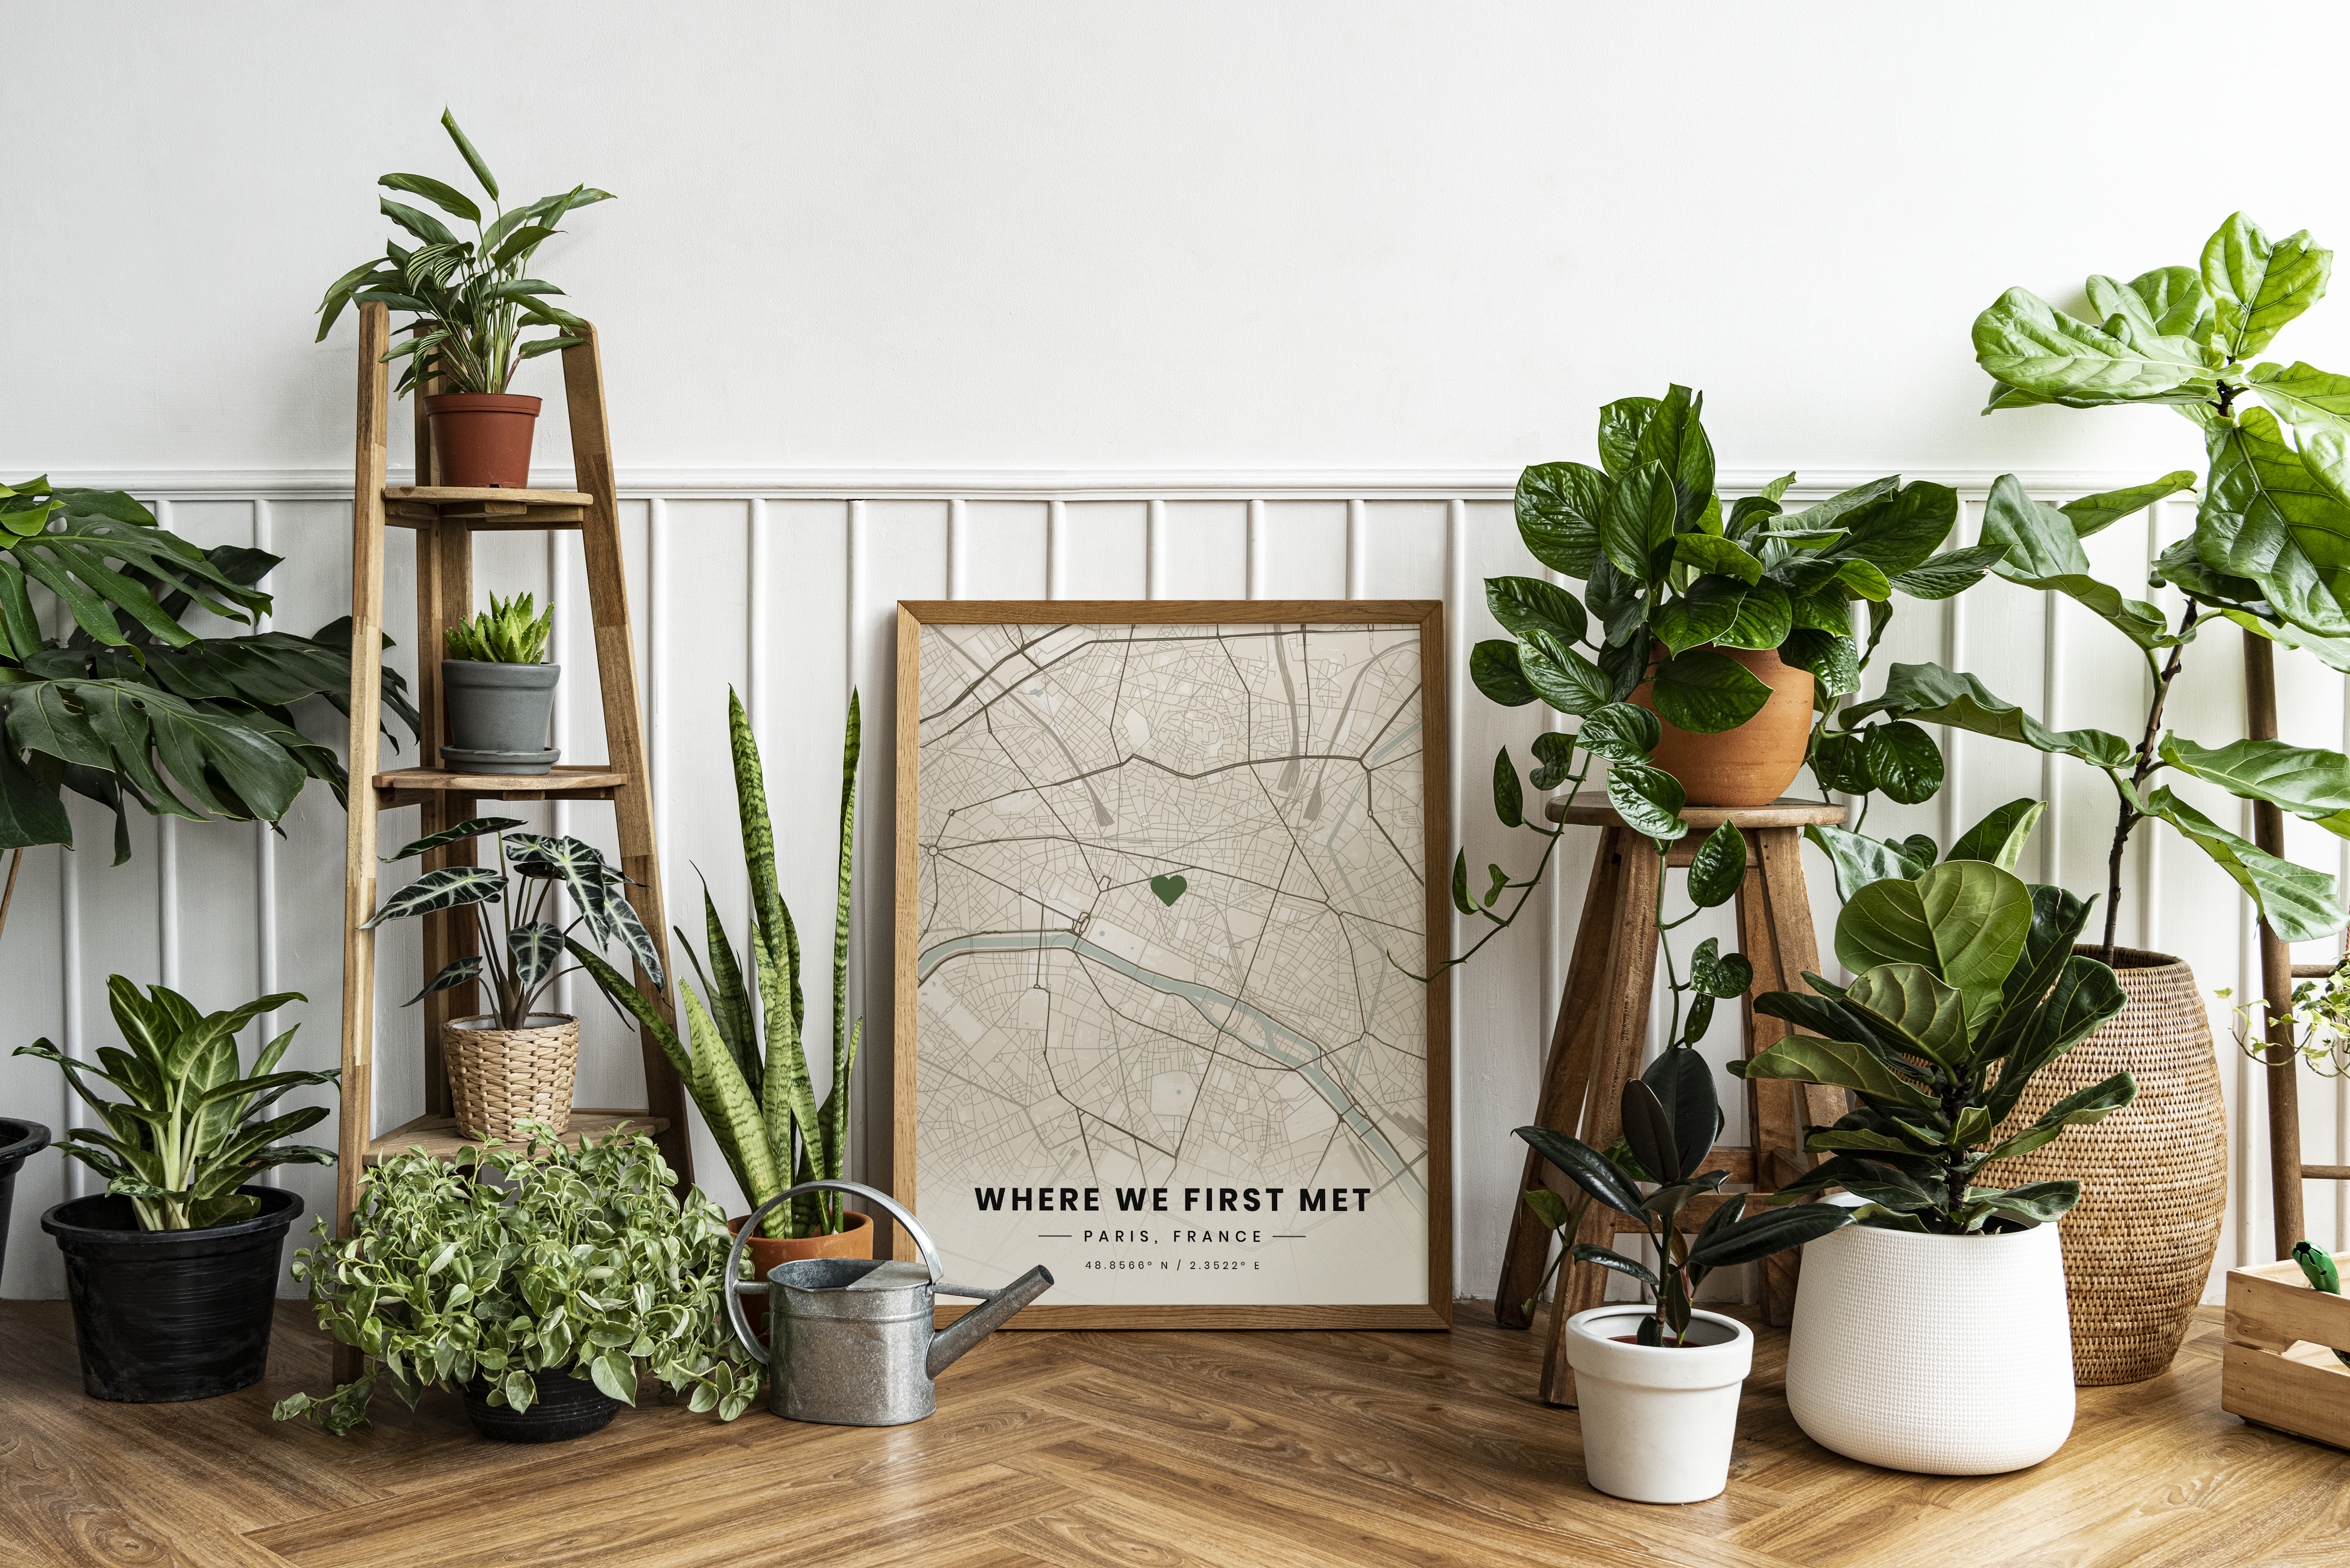 How To Design A Map: Map Designing Simplified with MixPlaces